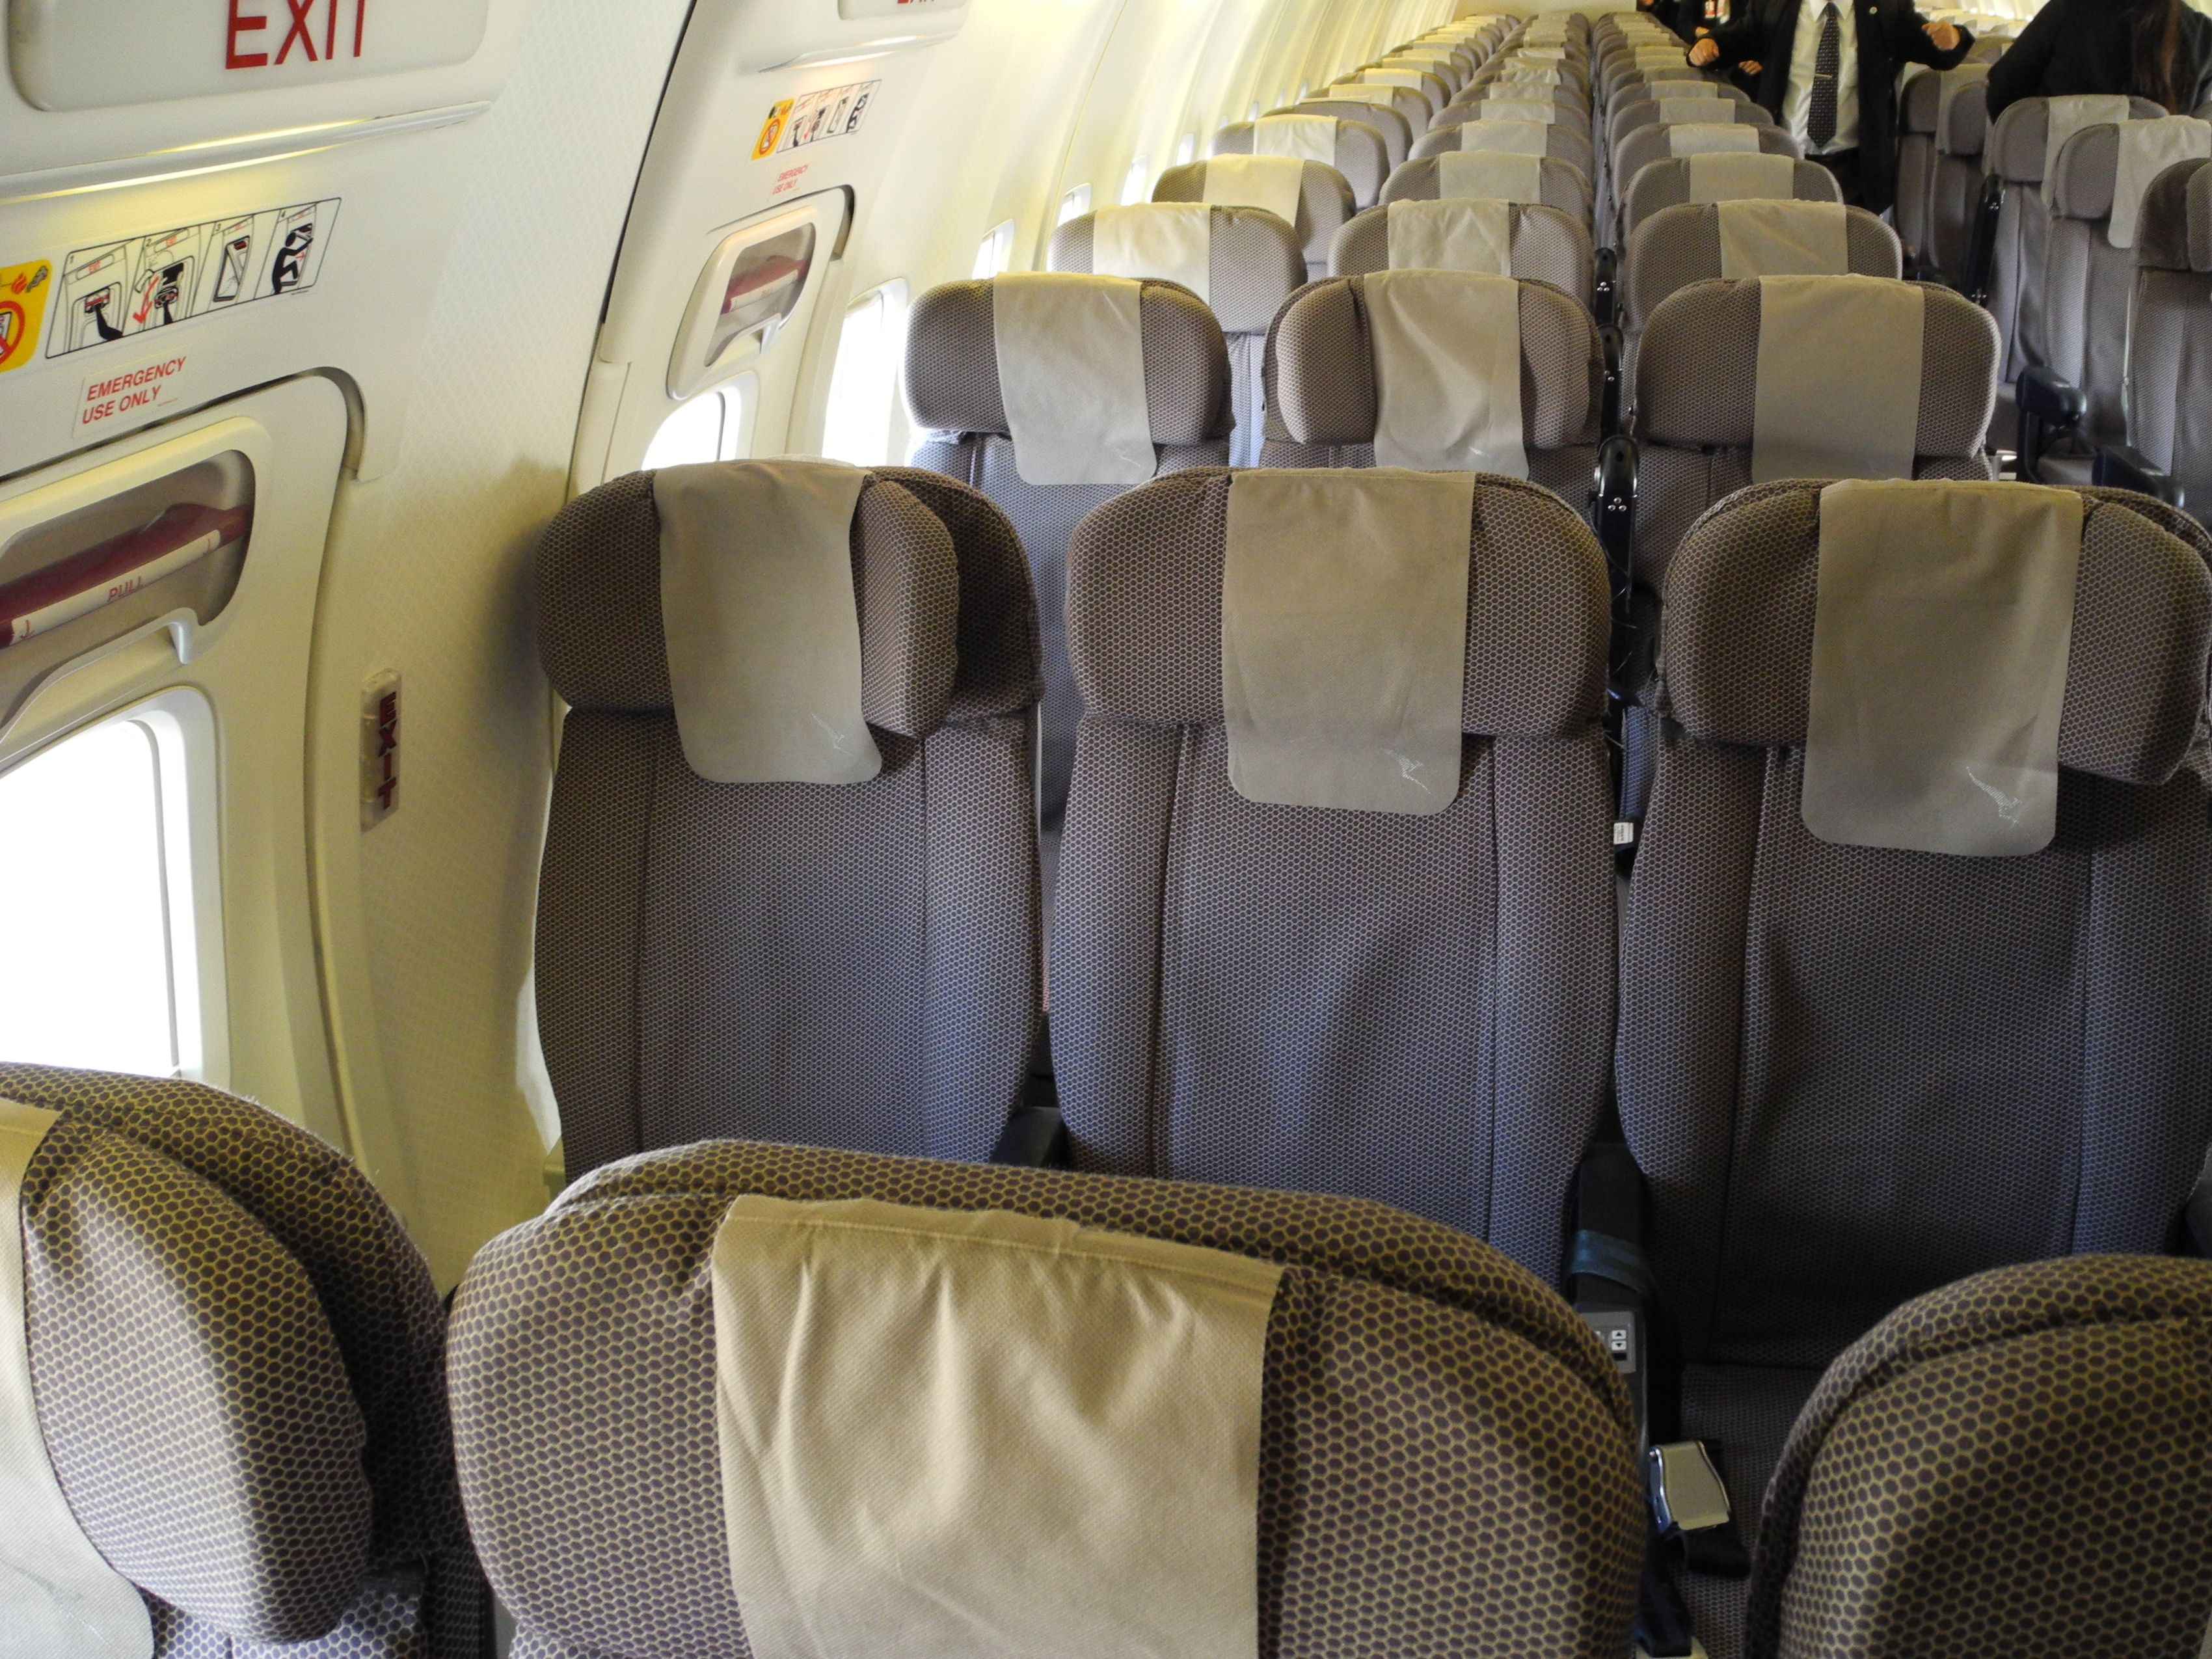 Seats_on_an_airplane